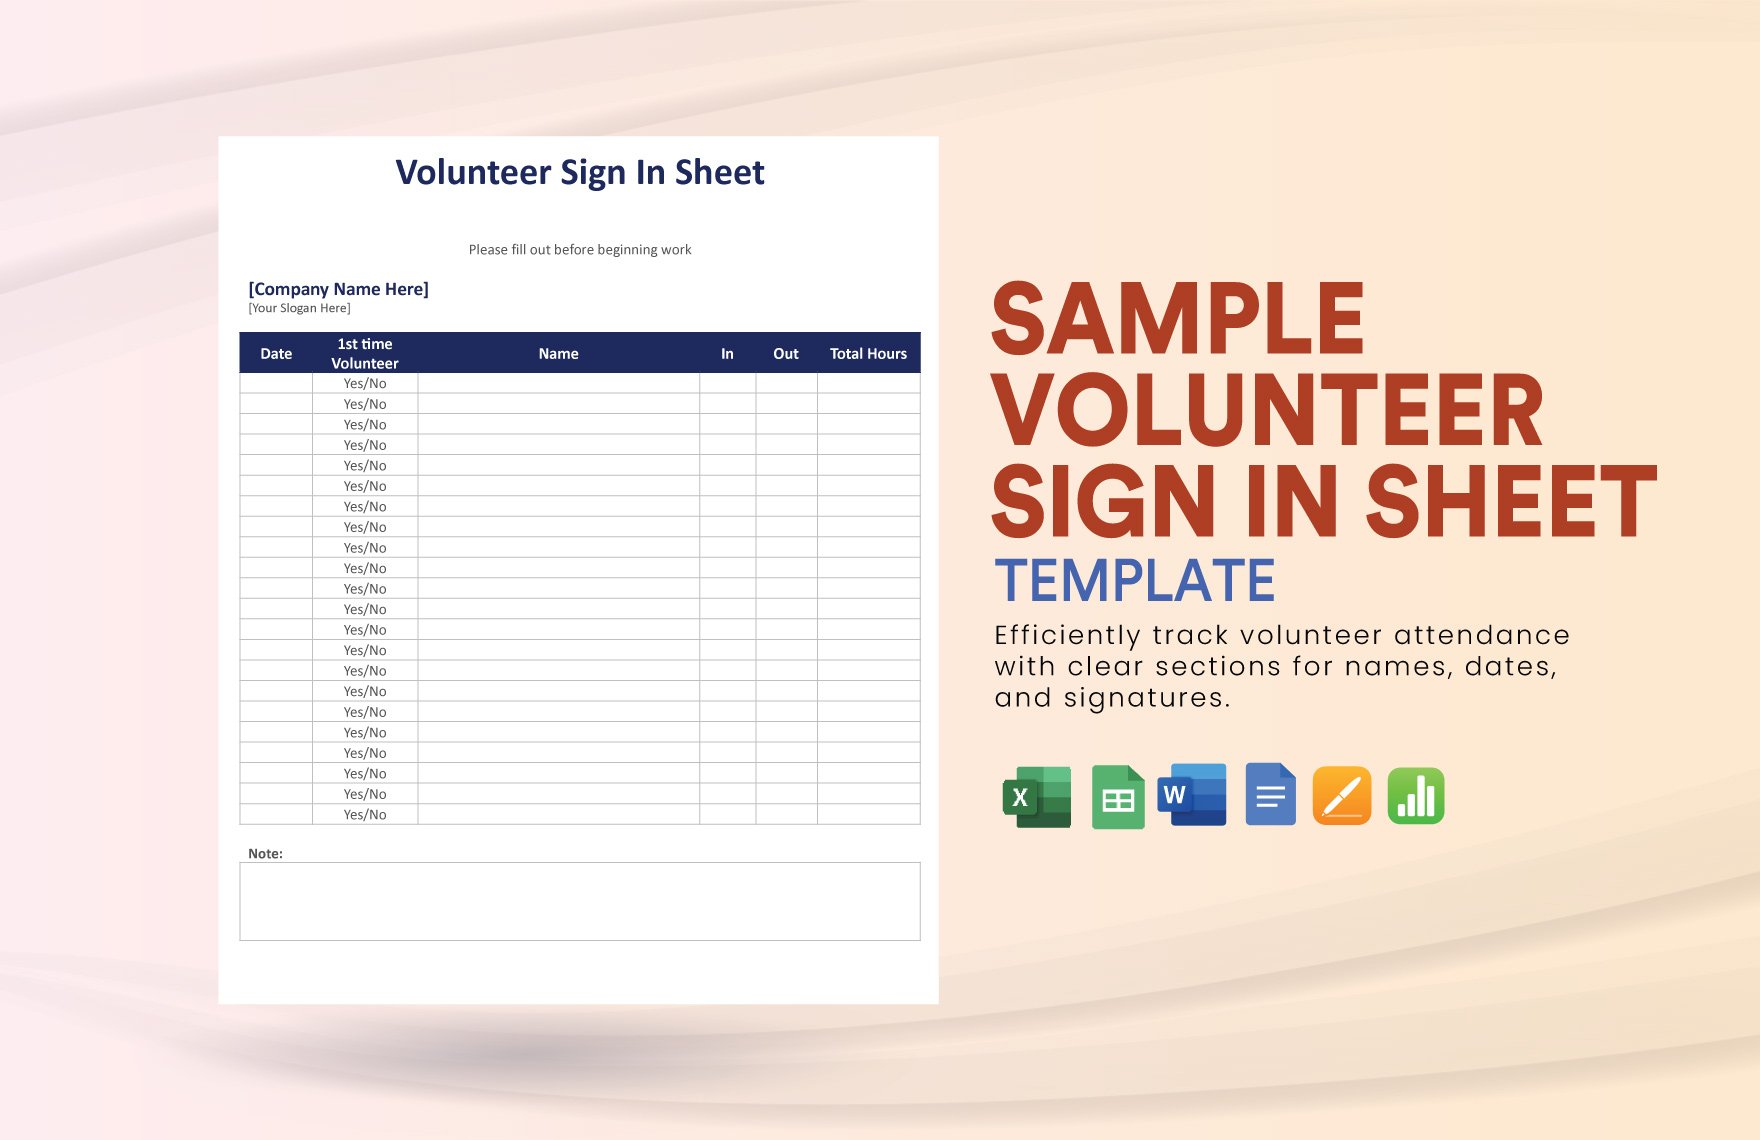 Sample Volunteer Sign in Sheet Template in Word, Google Docs, Excel, Google Sheets, Apple Pages, Apple Numbers